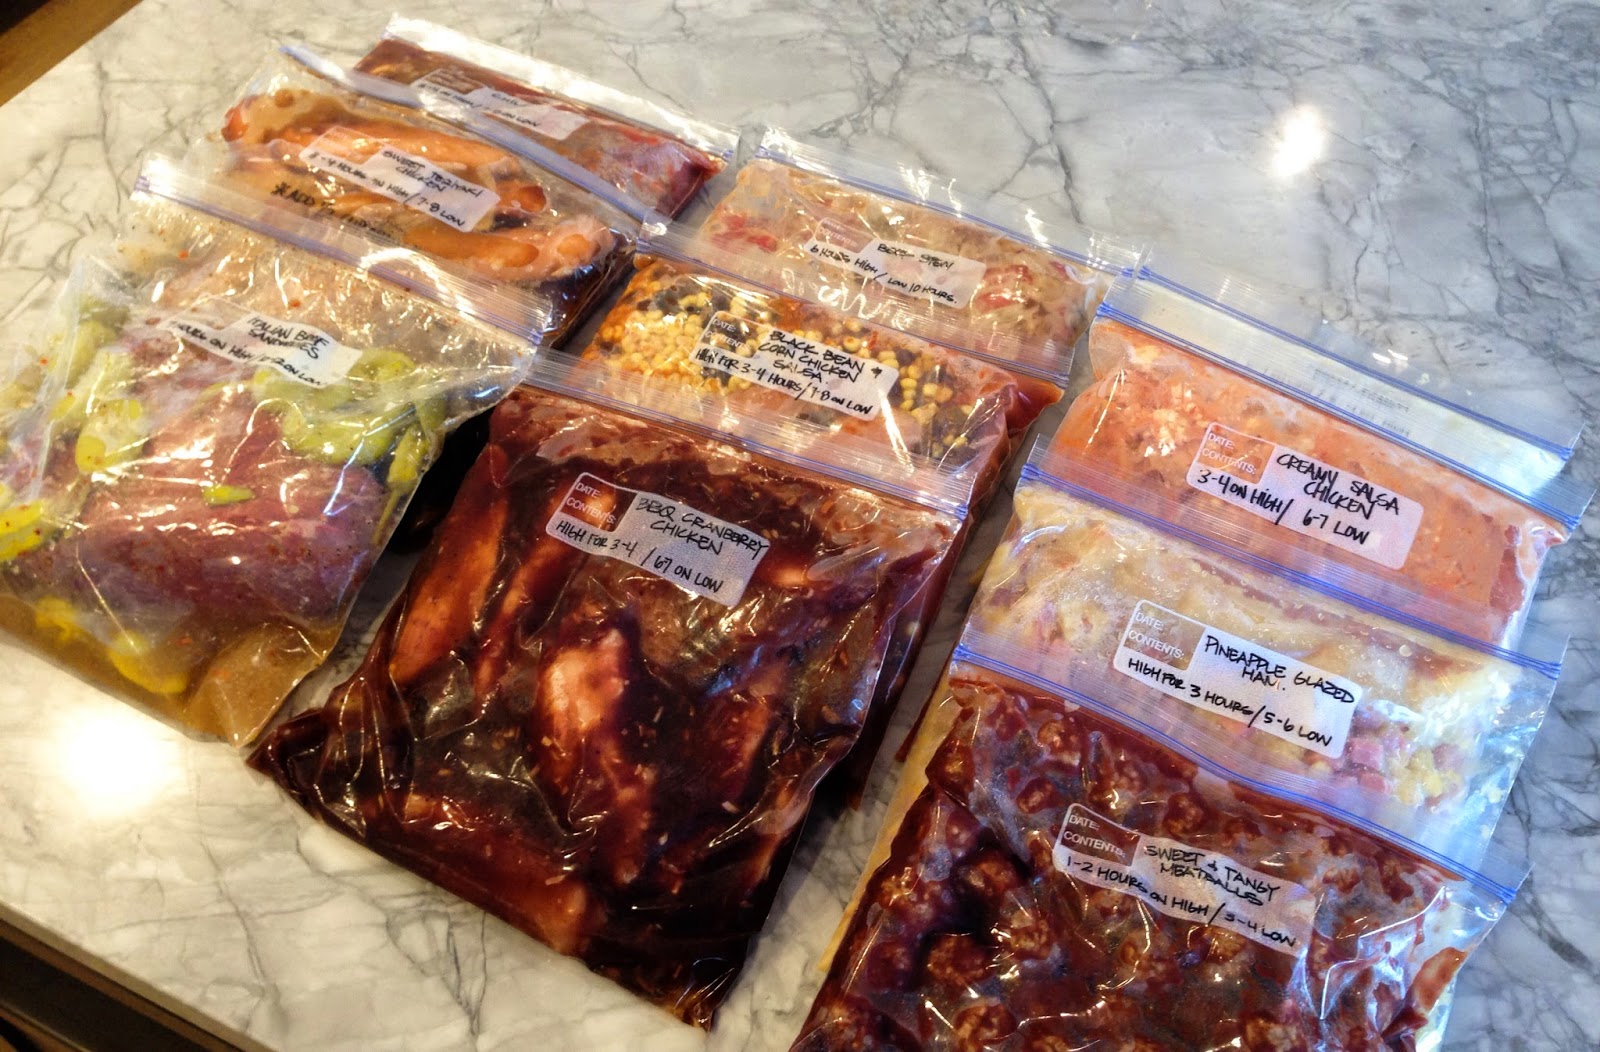 Earlier this year I made a bunch of freezer/ crock-pot meals.